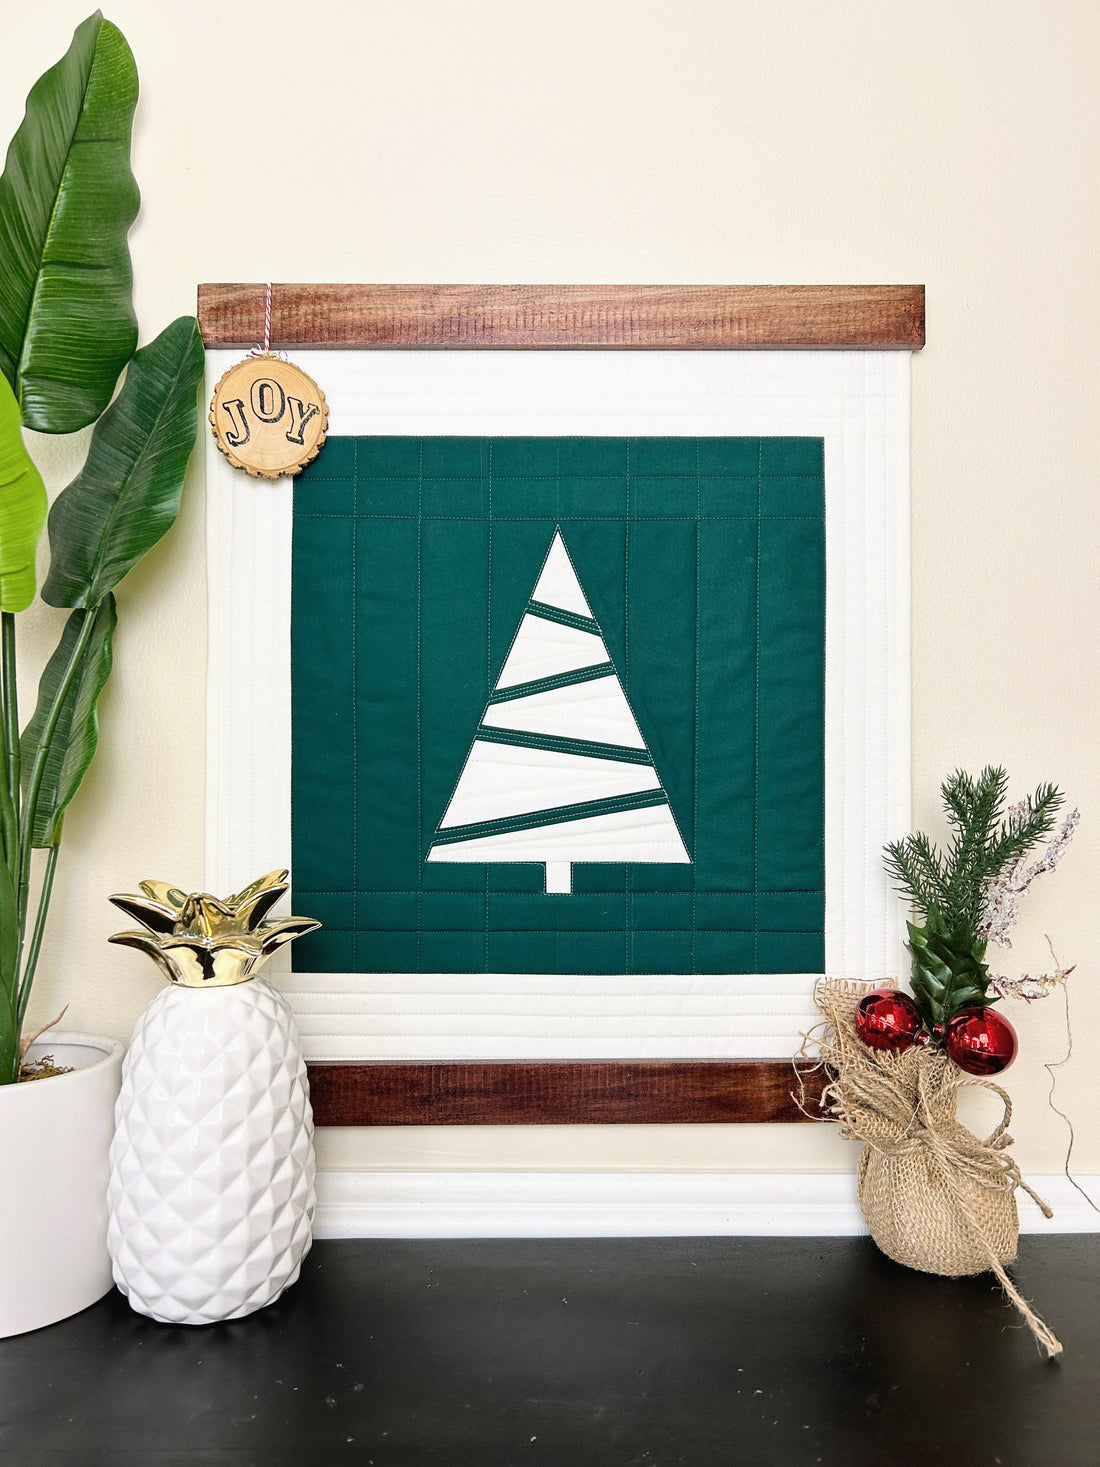 Let's Make A Quick Christmas Wall Hanging! (Includes Free FPP Template)